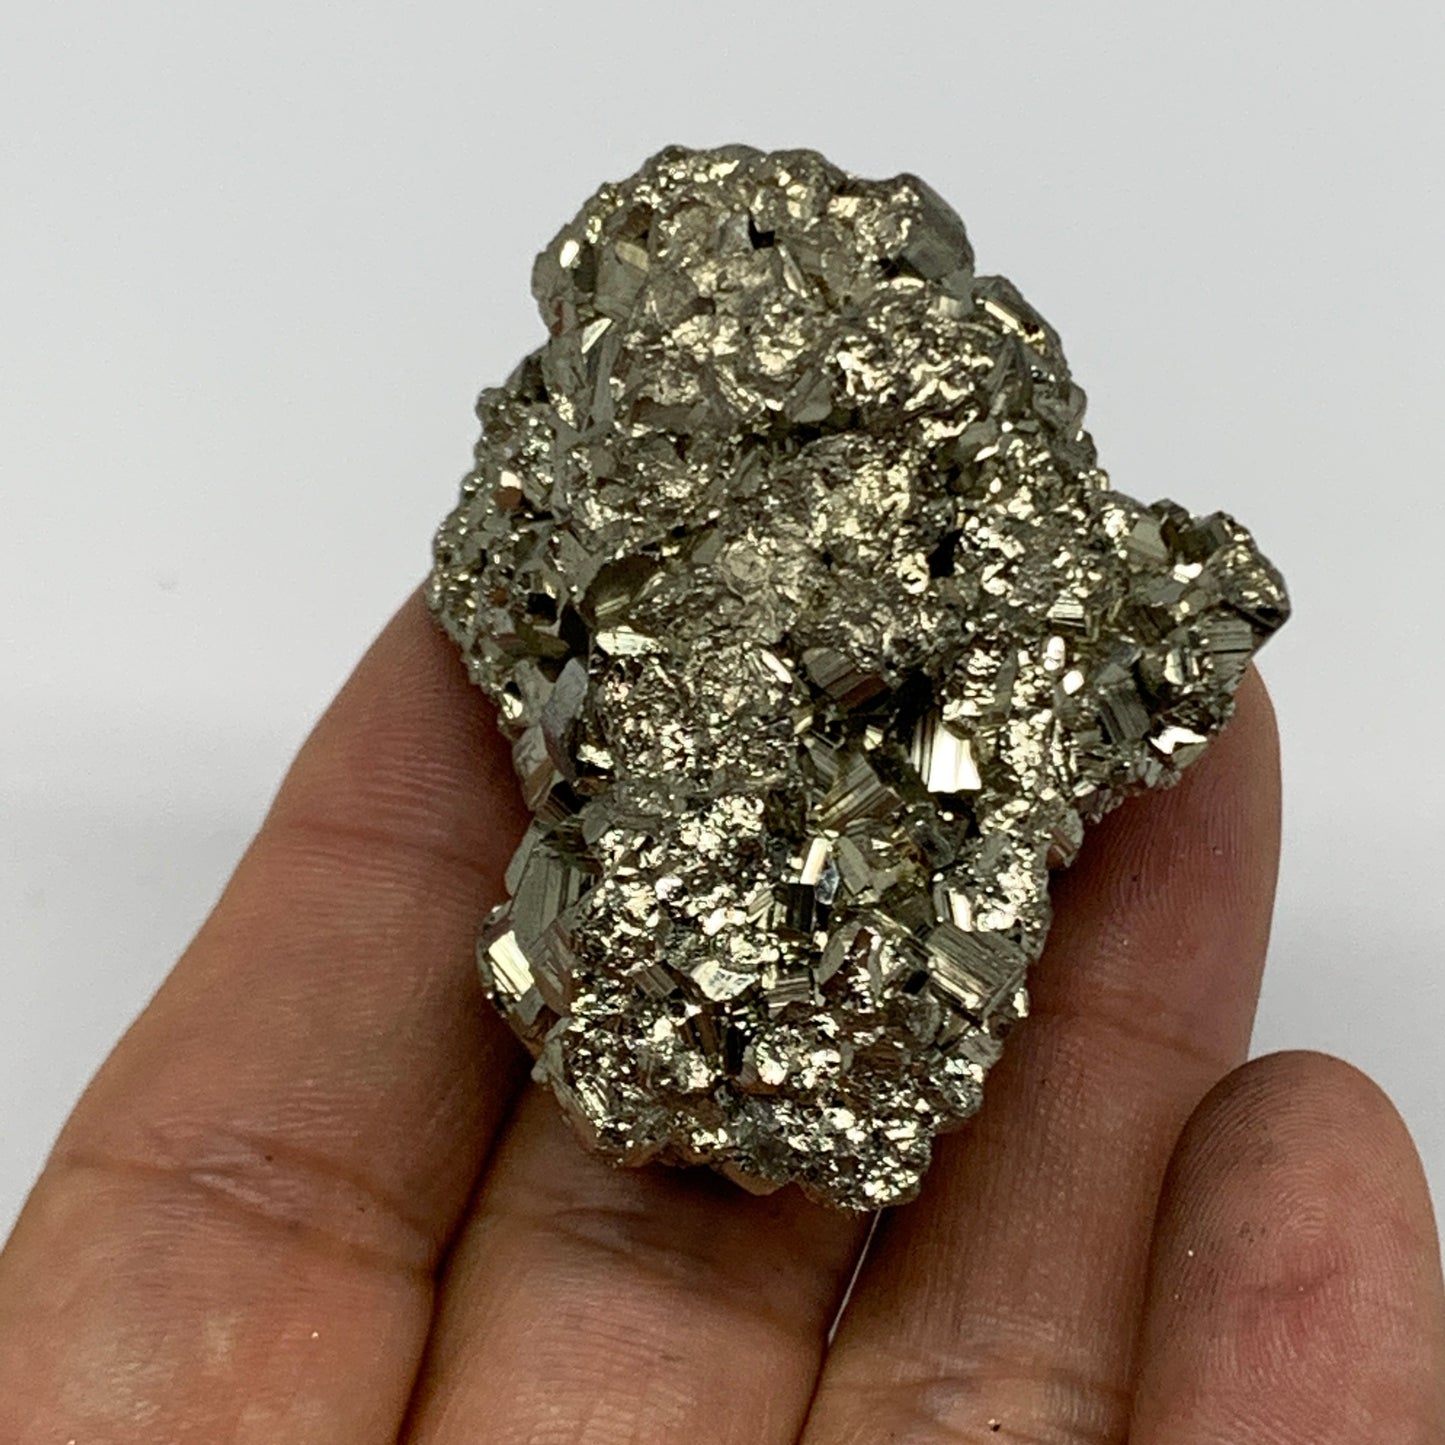 111.4g, 1.9"x1.3"x1.5", Natural Untreated Pyrite Cluster Mineral Specimens,B1937